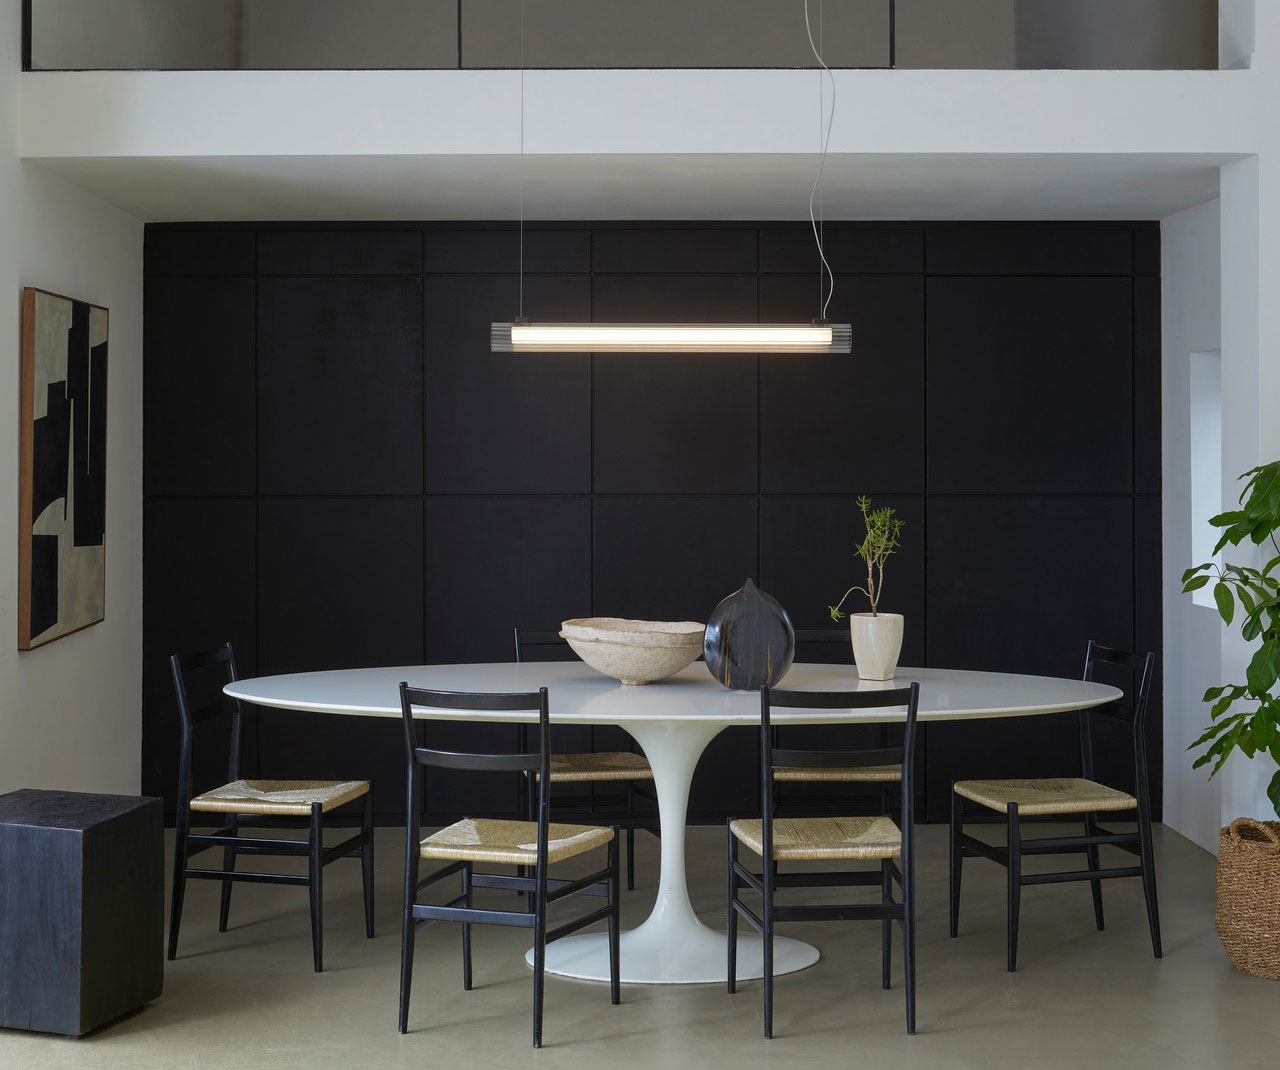 io Astro Linear Pendant Light Over the Dinning Table Installation